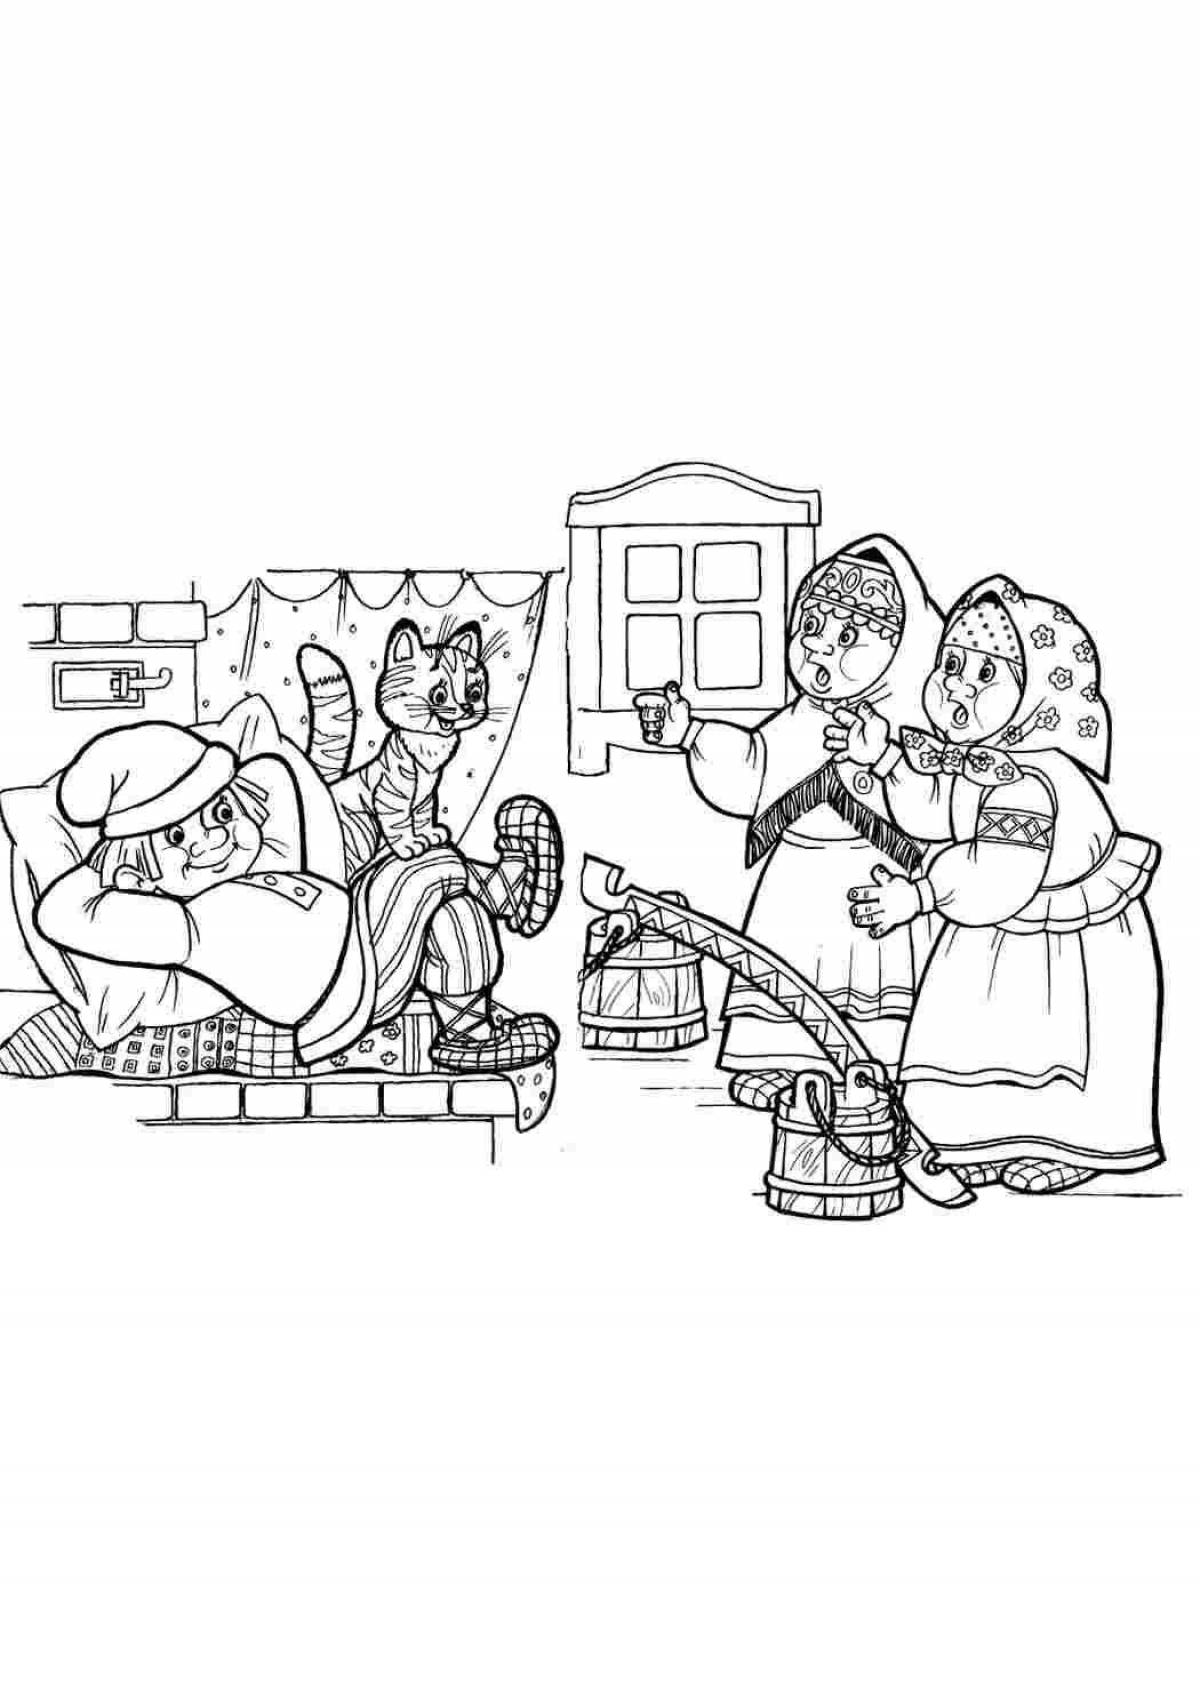 Rampant Lady Blizzard coloring page